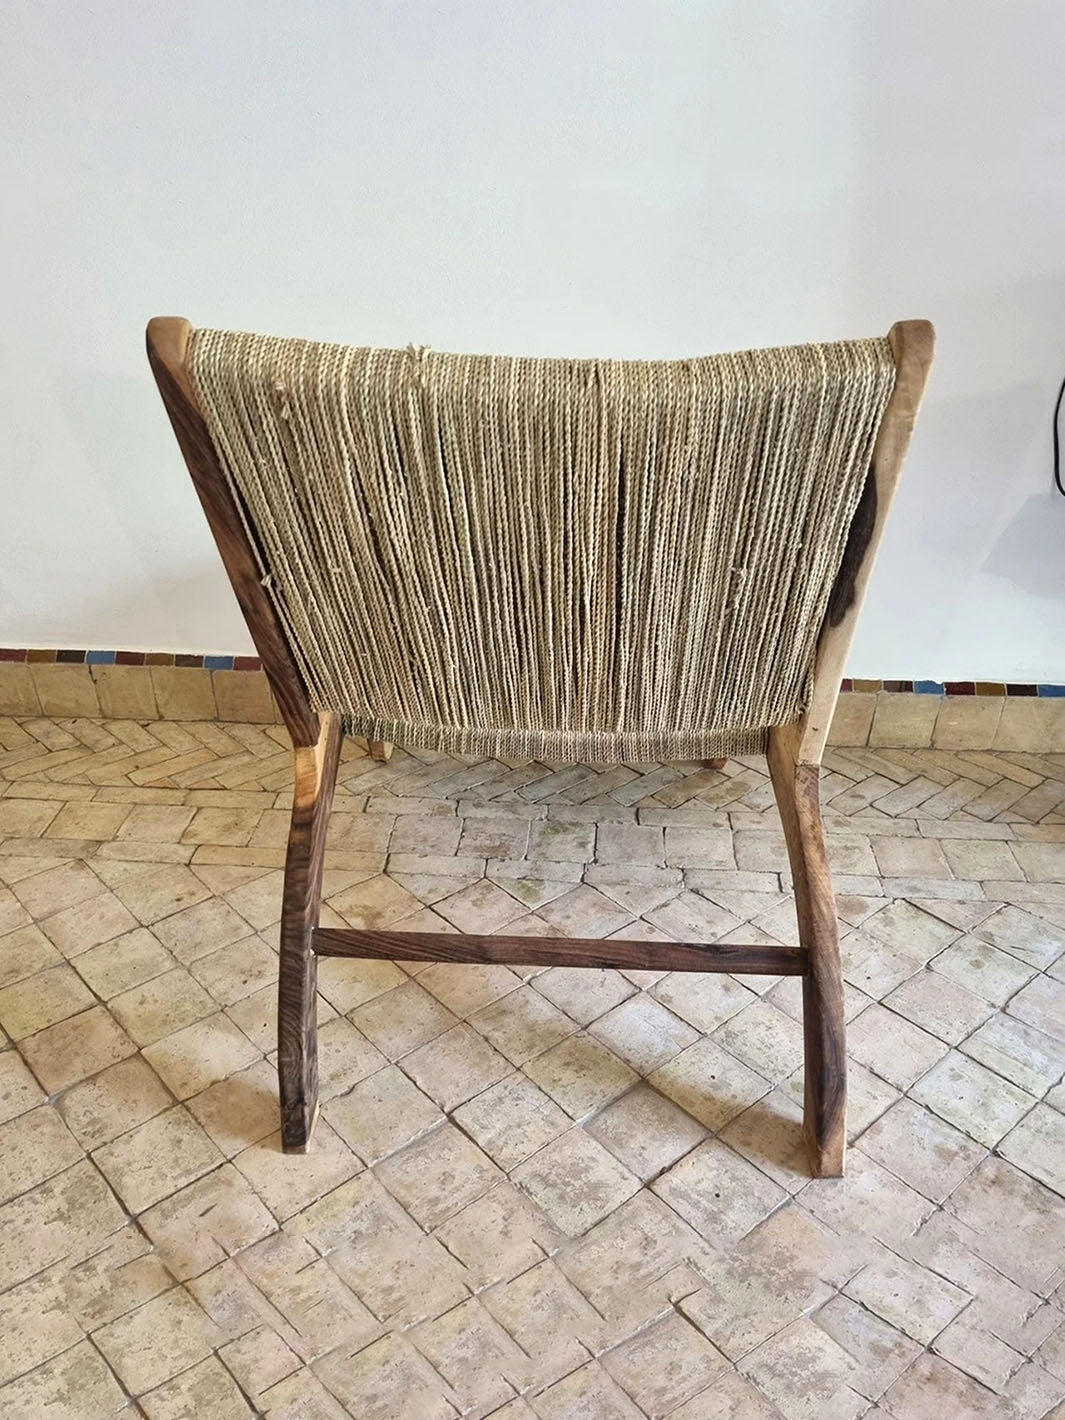 Handcrafted Artisanal Moroccan Ropes Wooden Armchair Libitii Chairs LIB-0082-5